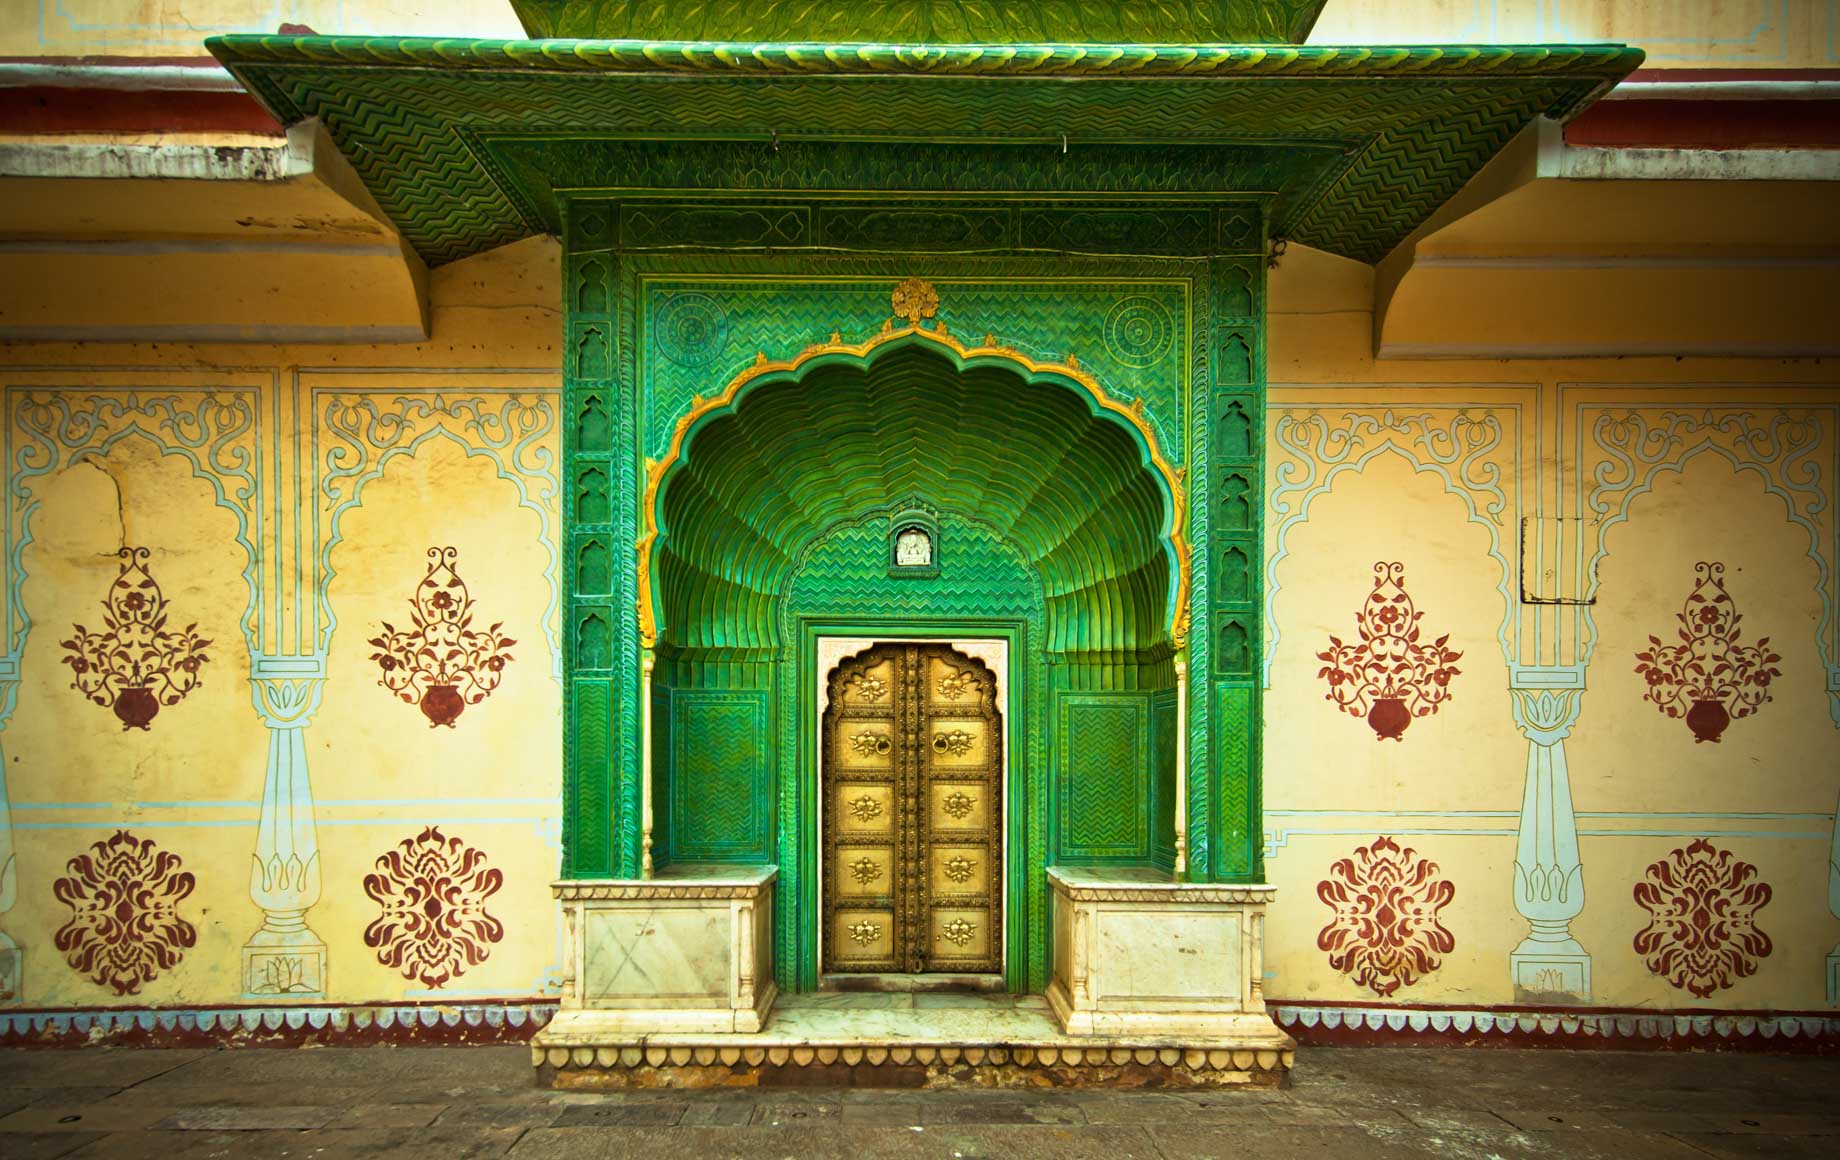 Jaipur Traditional Patterns and Colorful Architecture